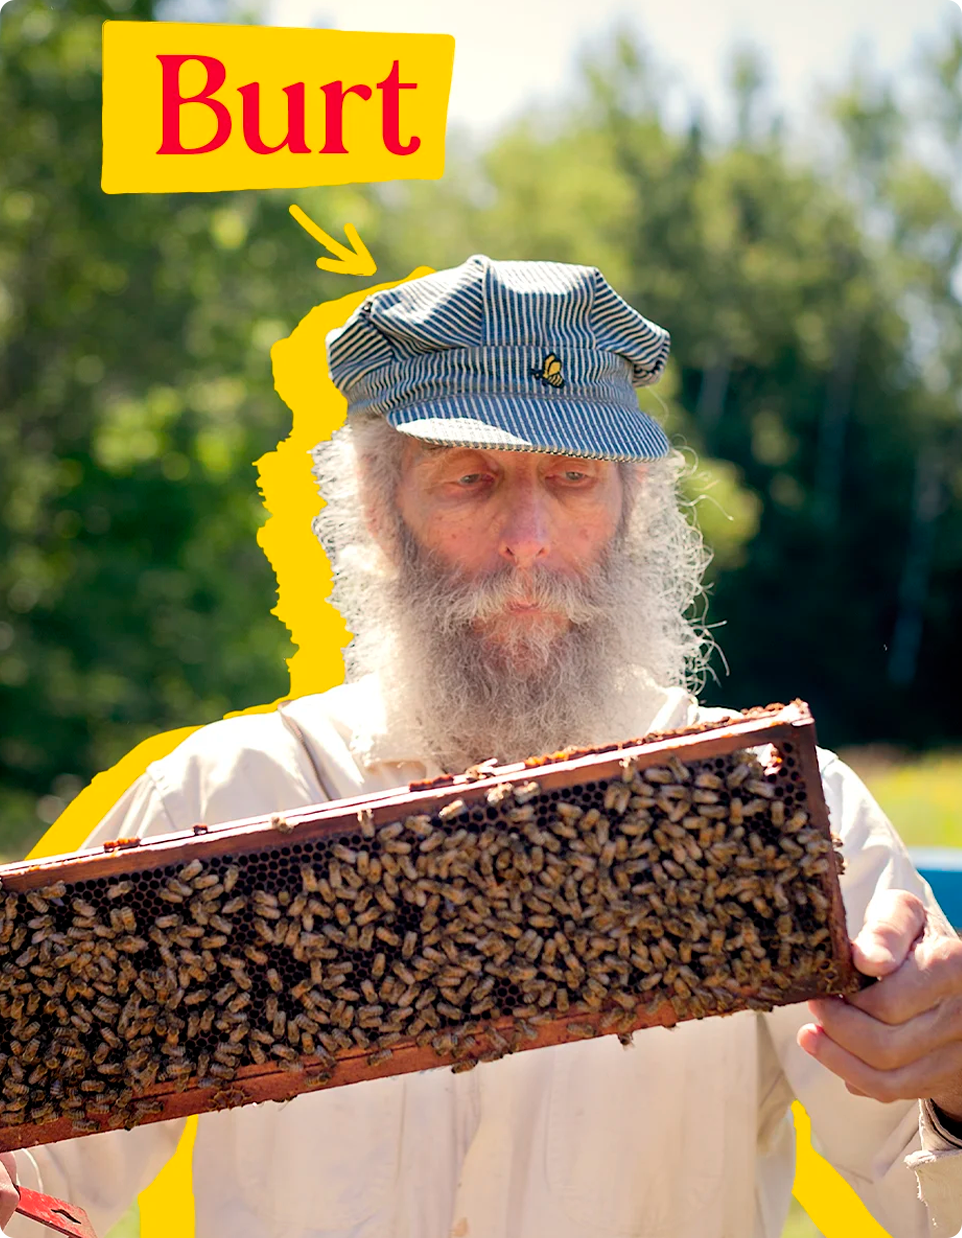 Burt in cap with bees, Burt callout above his head